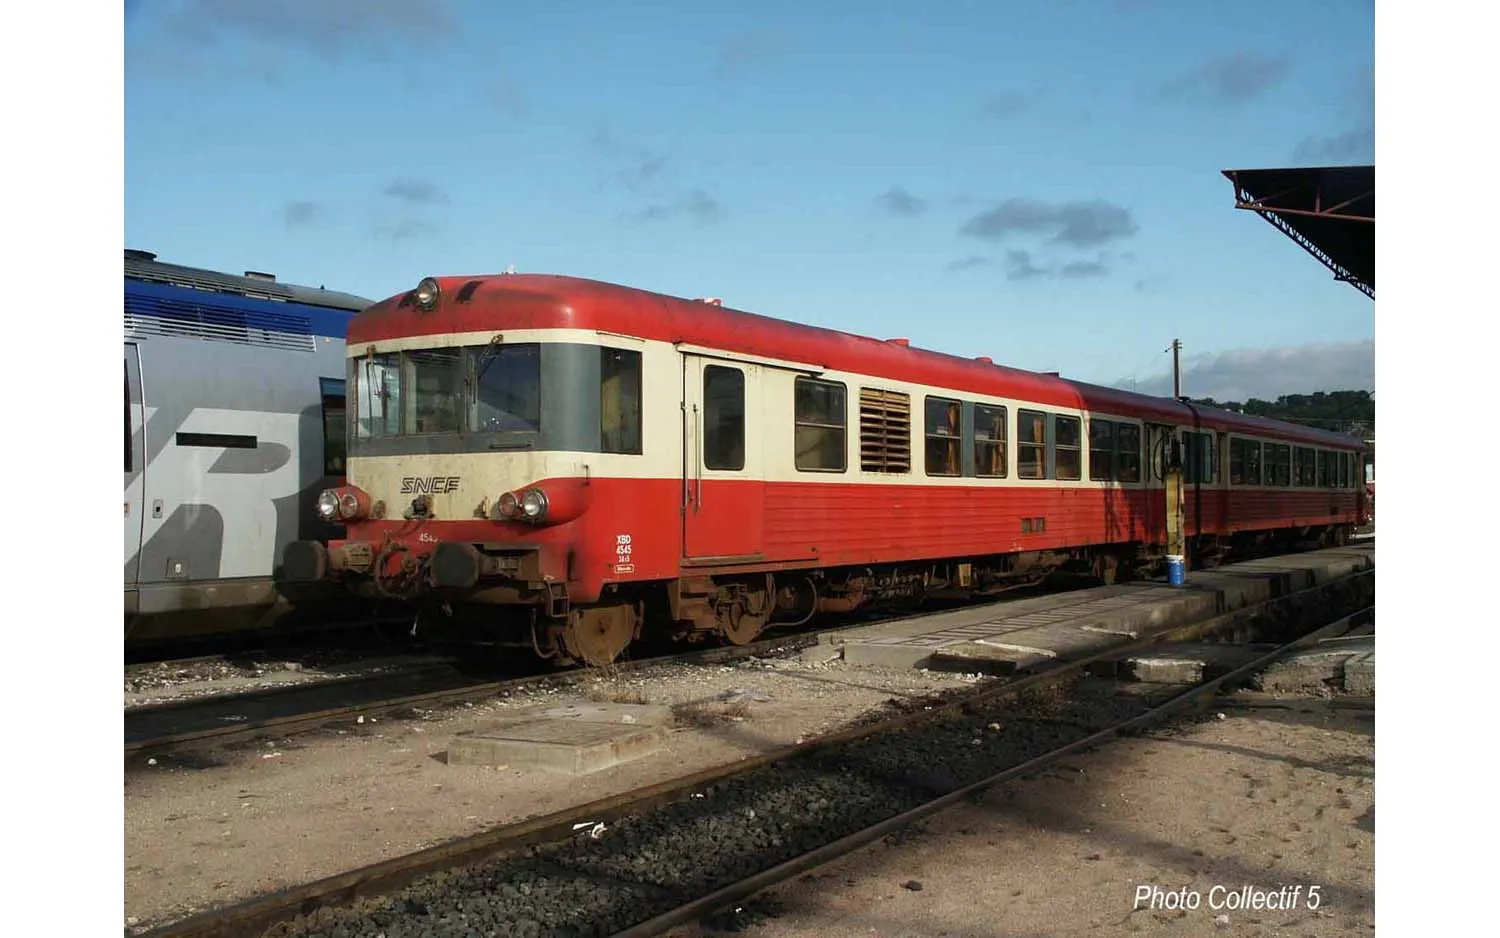 SNCF, 2-unit railcar EAD X 4700 (XBD 4732 + XRAB 8729), red and cream livery, period IV